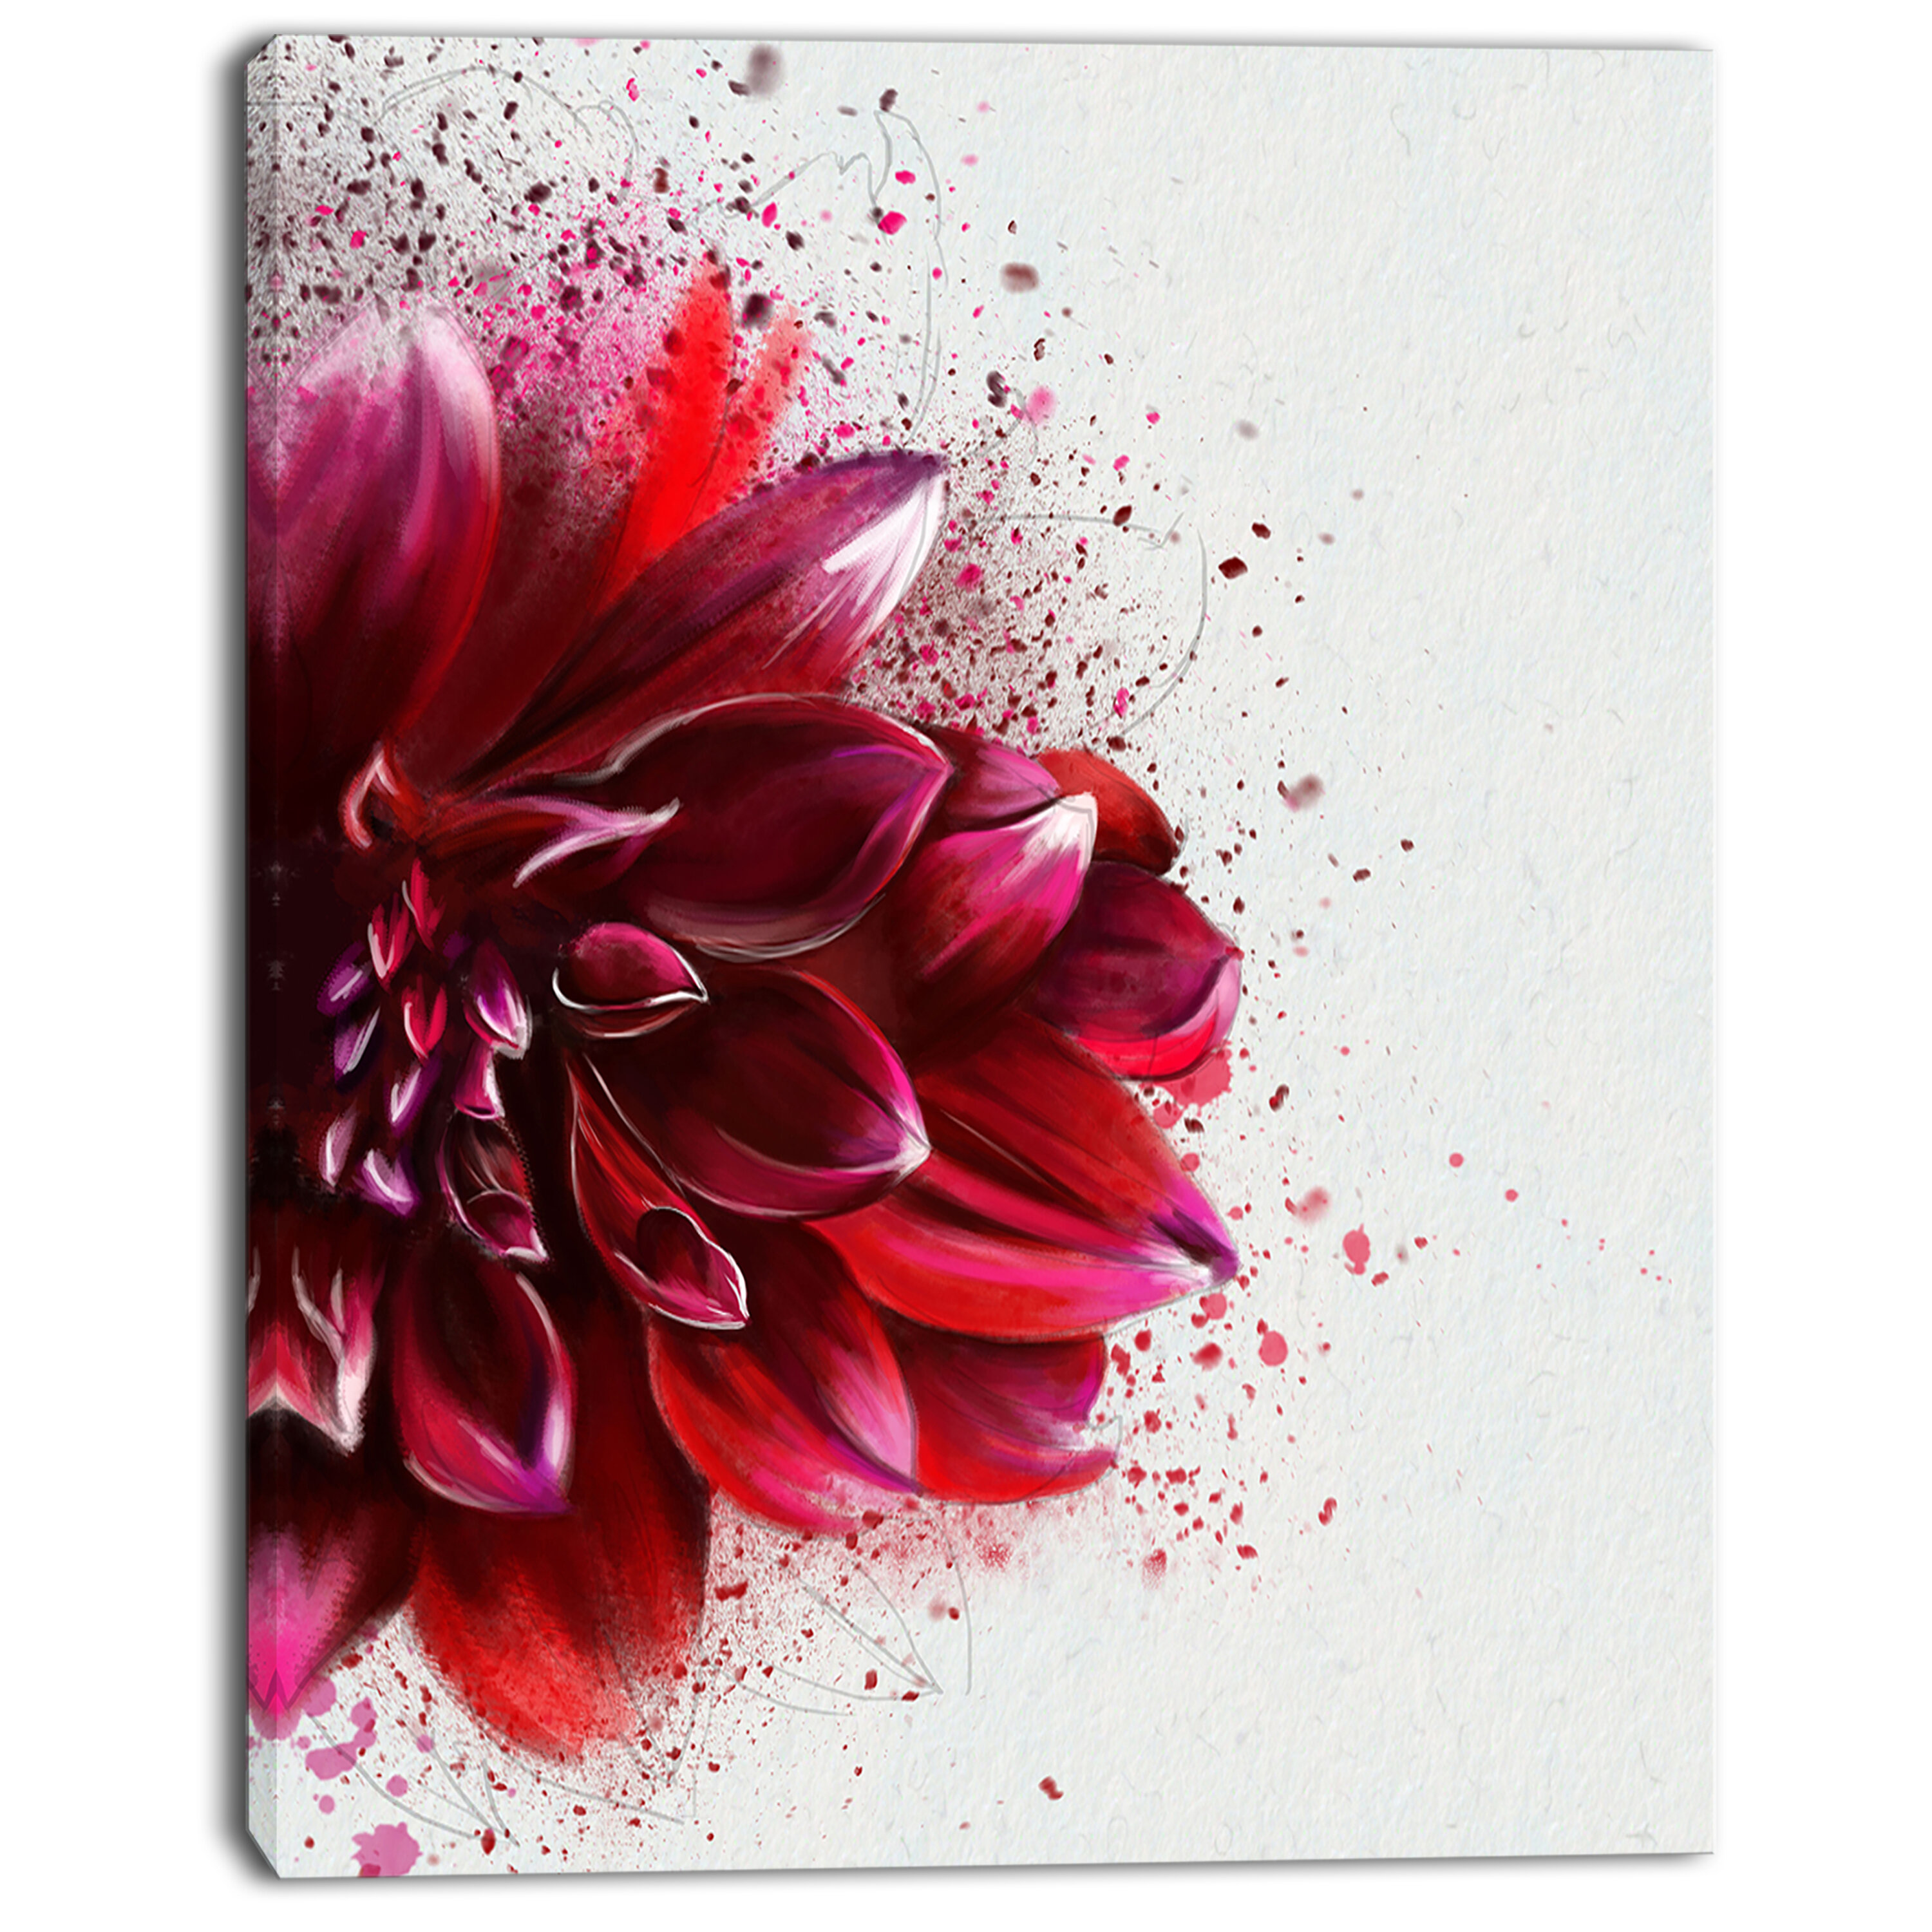 Floral Roses Love Flowers SINGLE CANVAS WALL ART Picture Print VA 